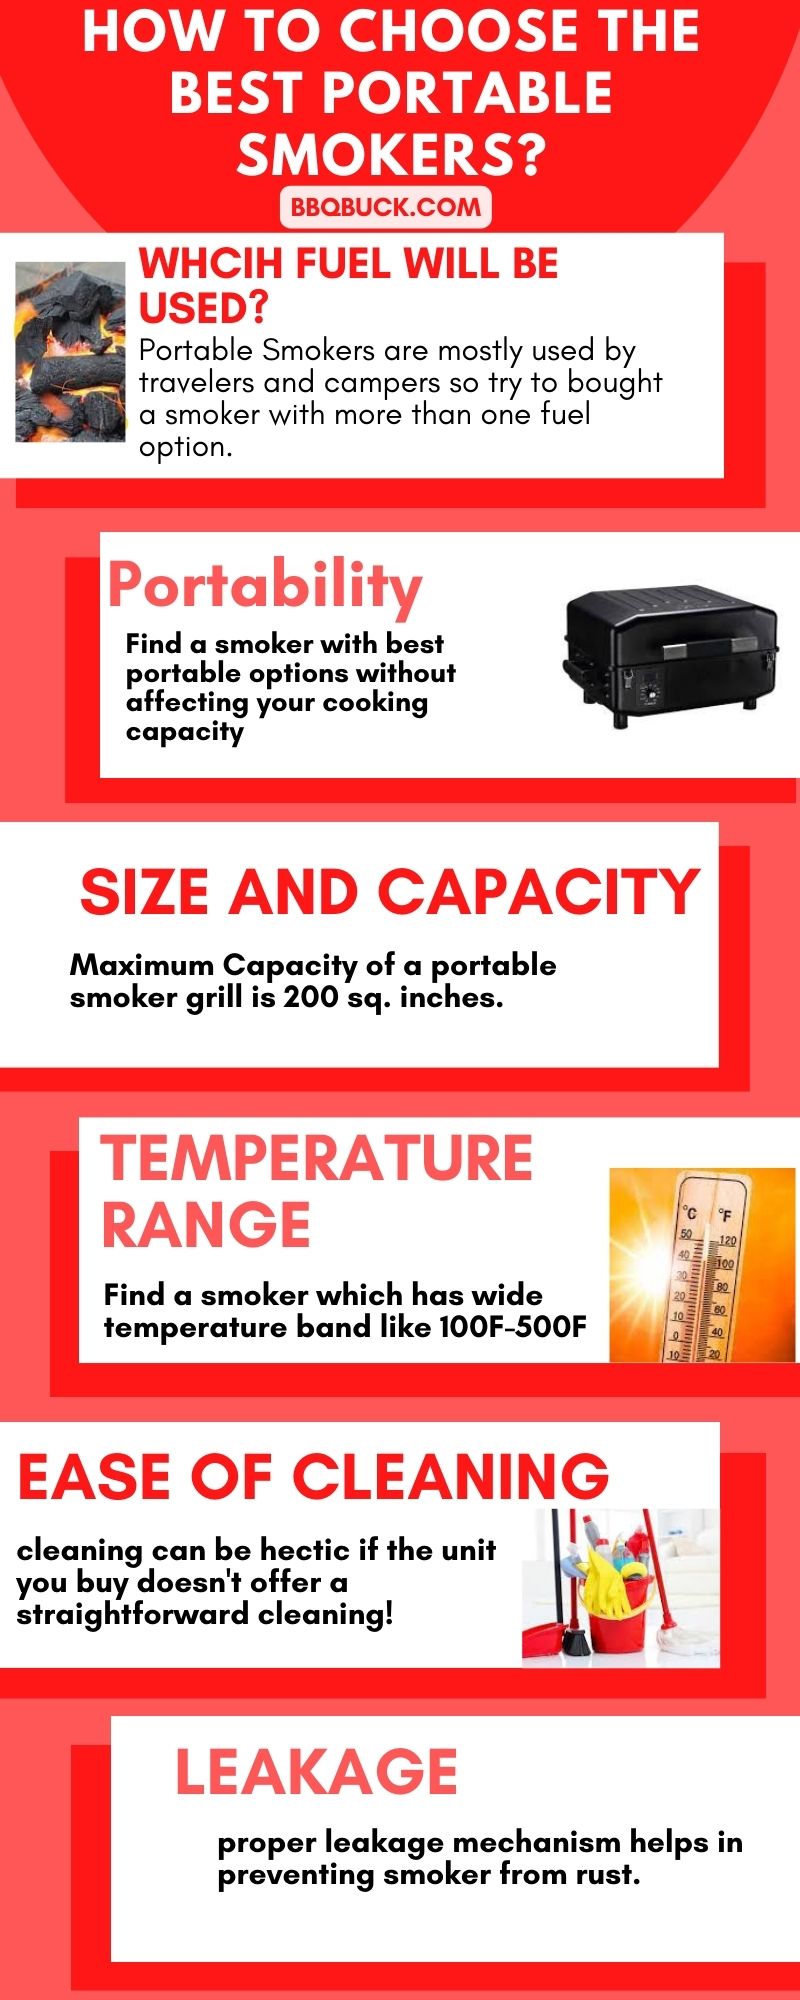 best portable smoker,Small smokers grills